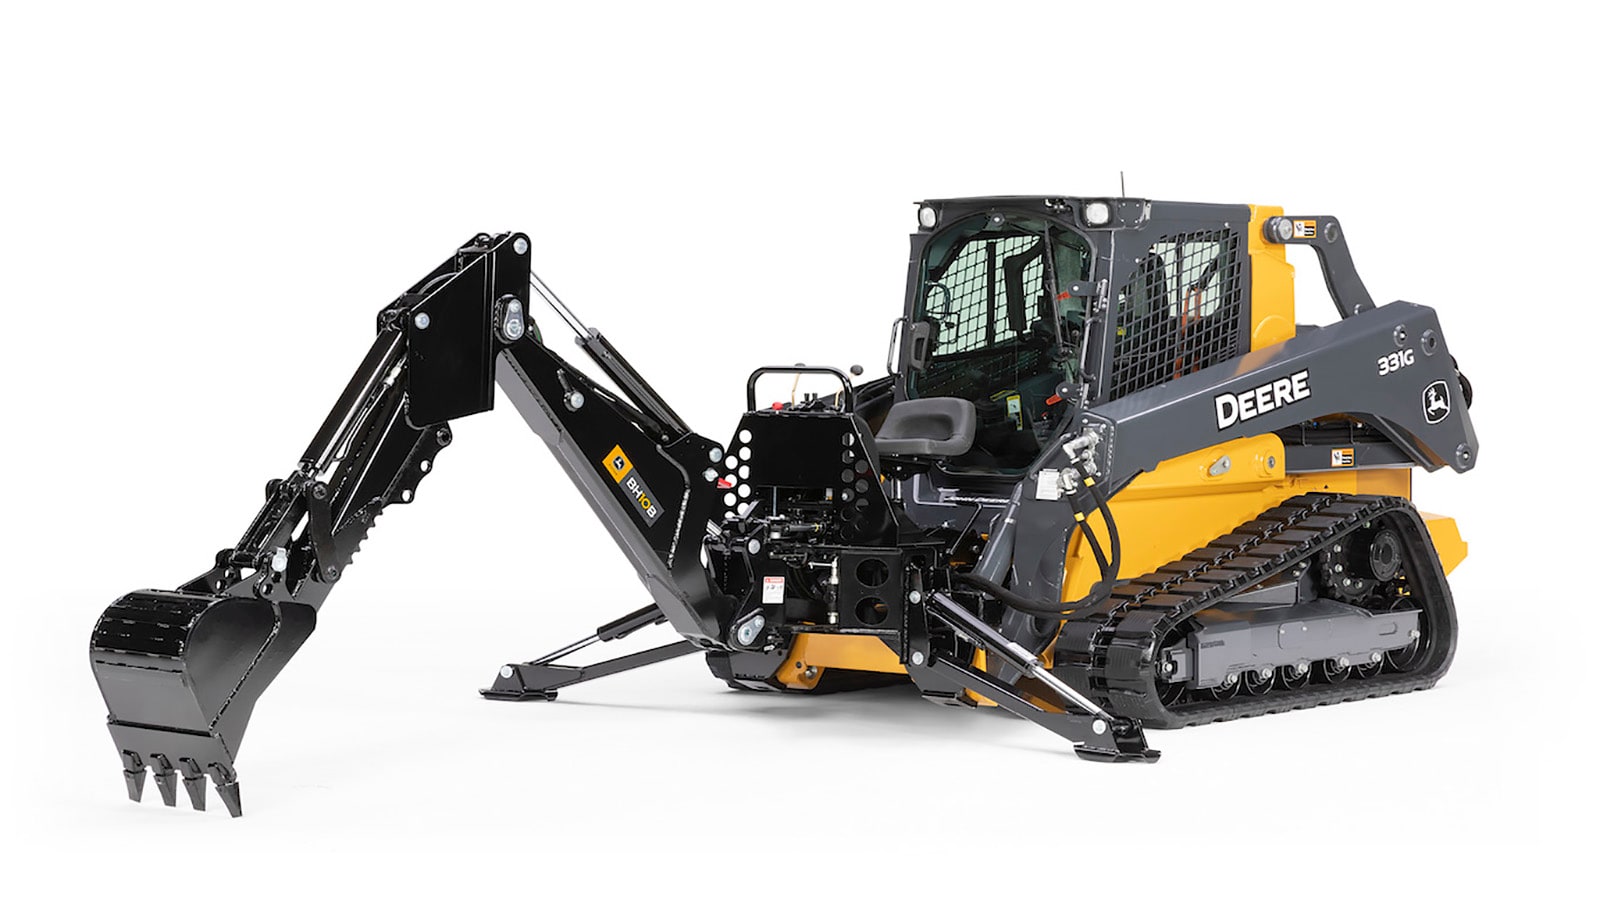 BH10B Backhoe Attachment on 331G Compact Track Loader with white background